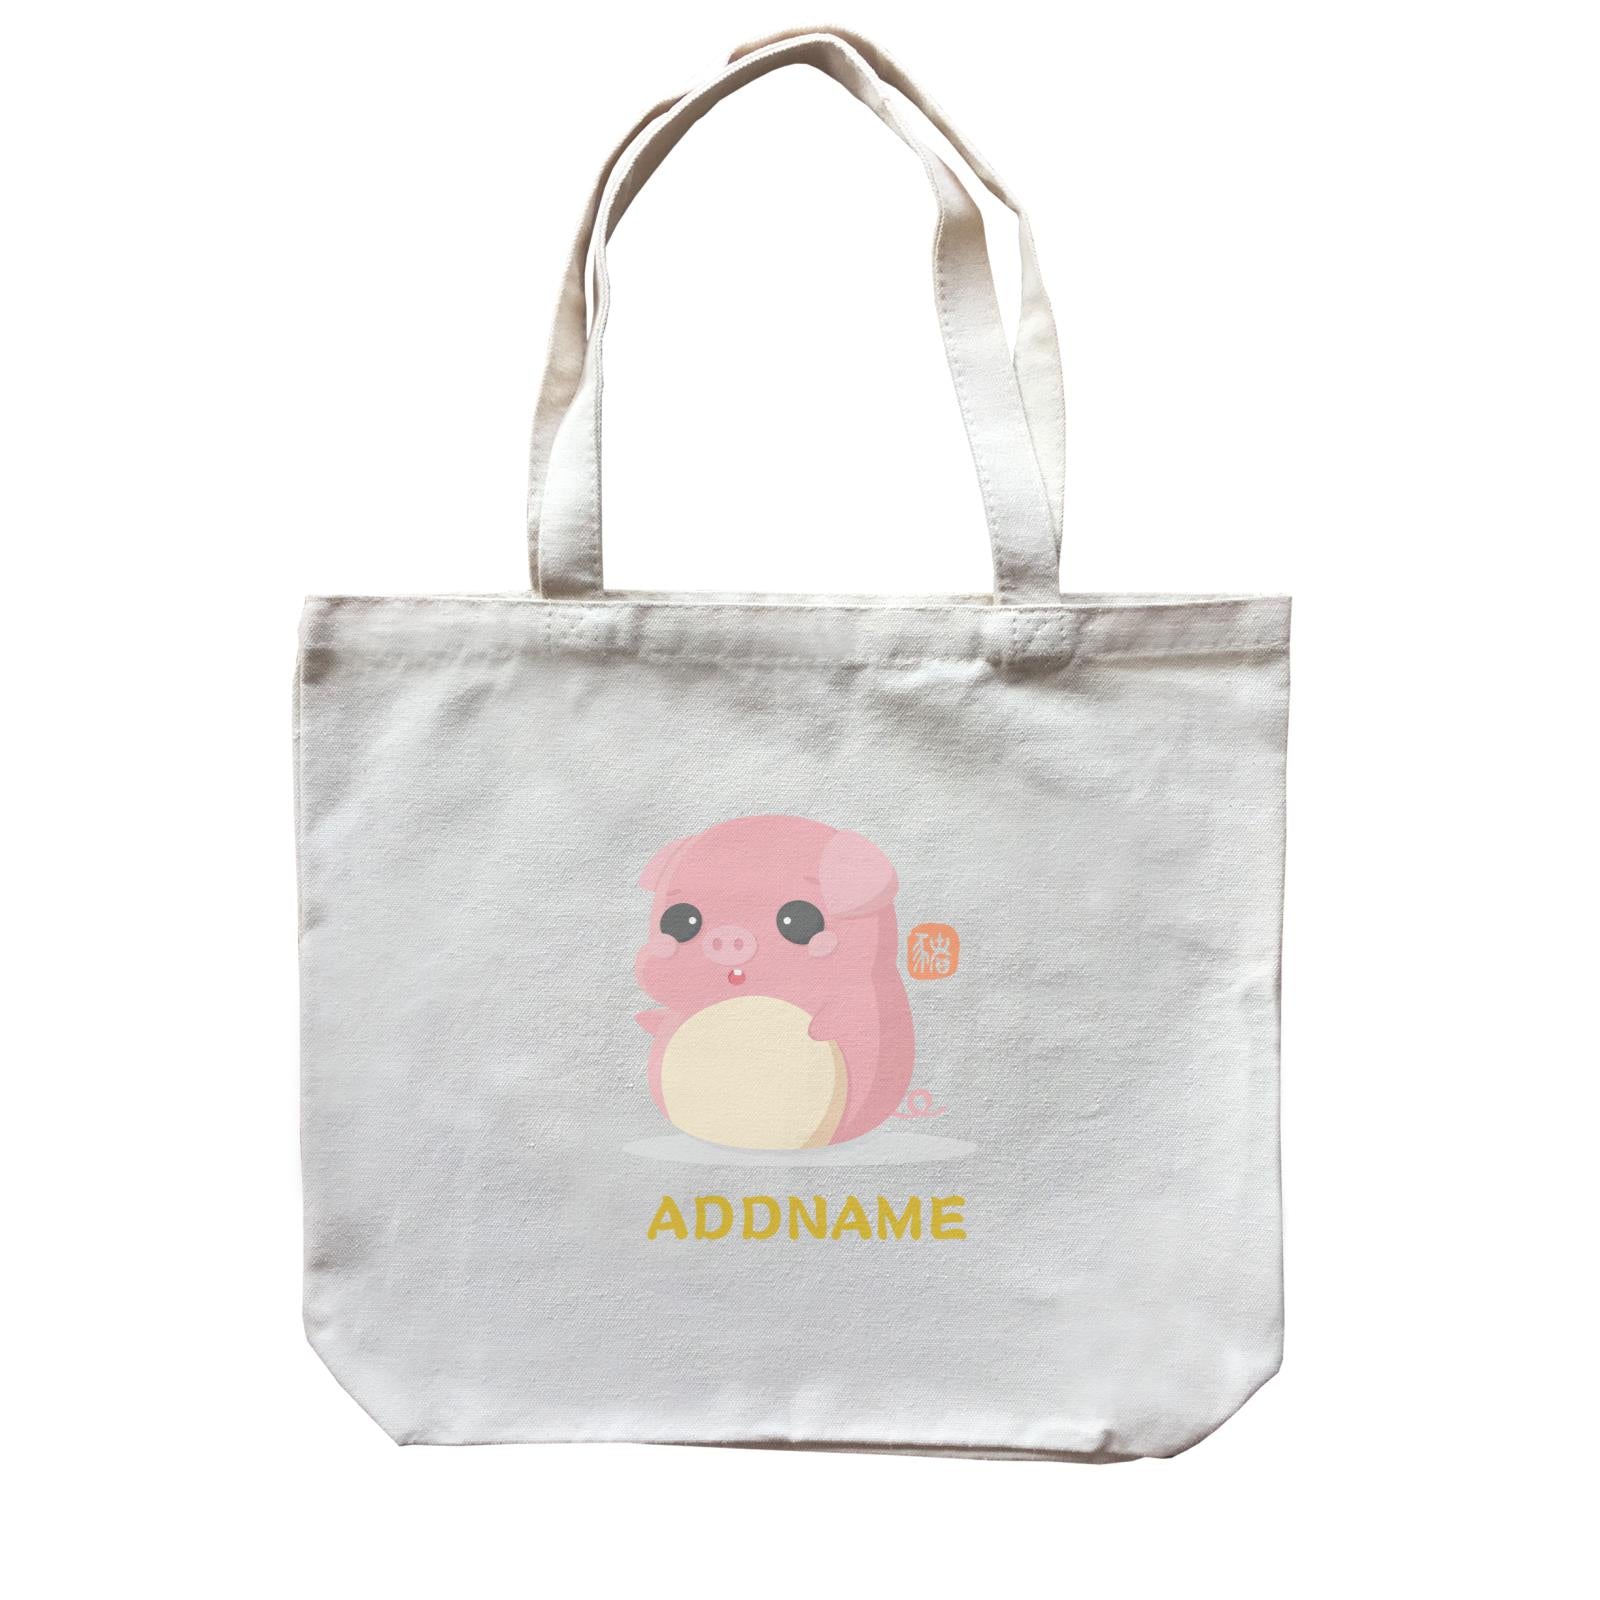 Chinese New Year Cute Twelve Zodiac Animals Pig Addname Canvas Bag